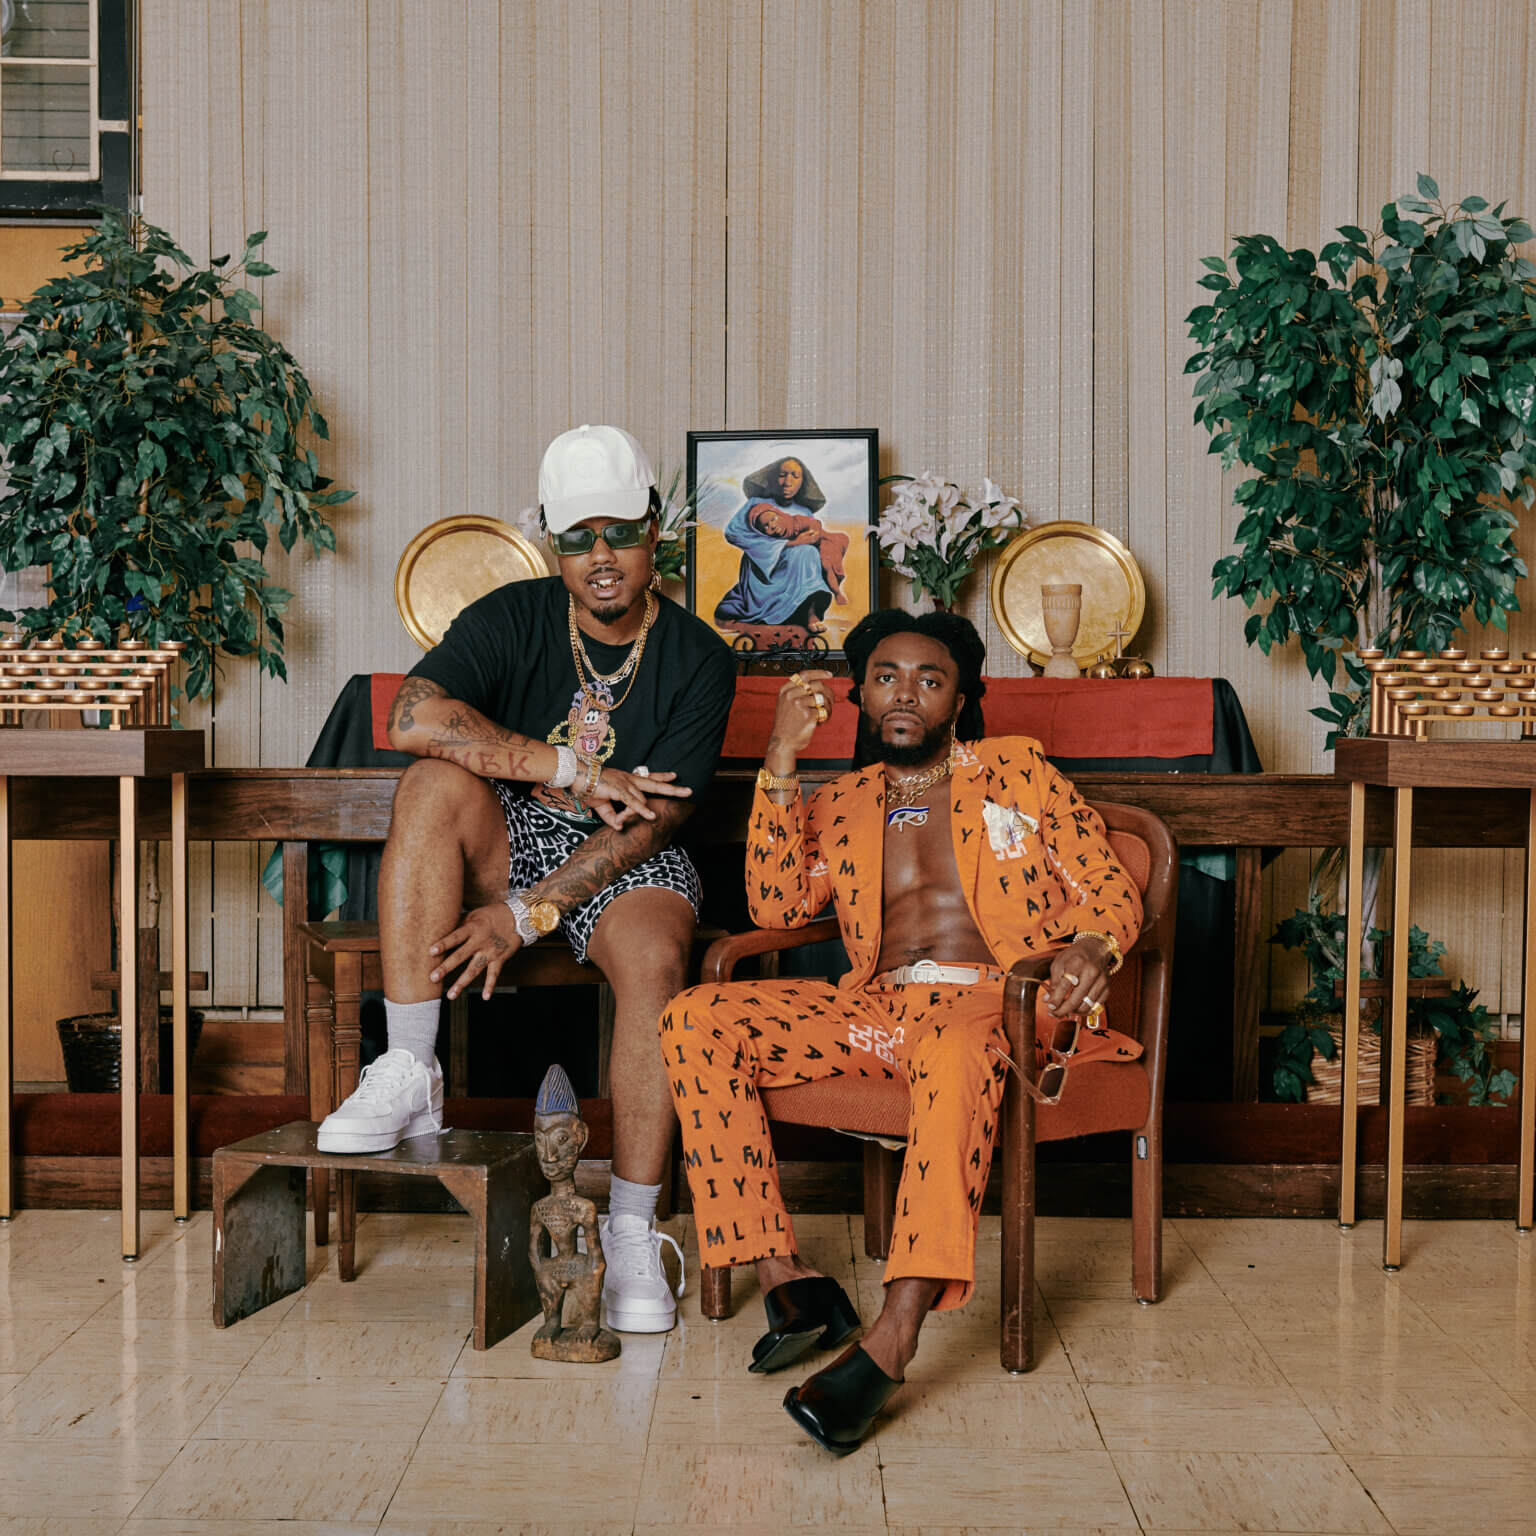 EARTHGANG have Shared their new single “American Horror Story.” The track is off their forthcoming release Ghetto Gods, available 1/28/22